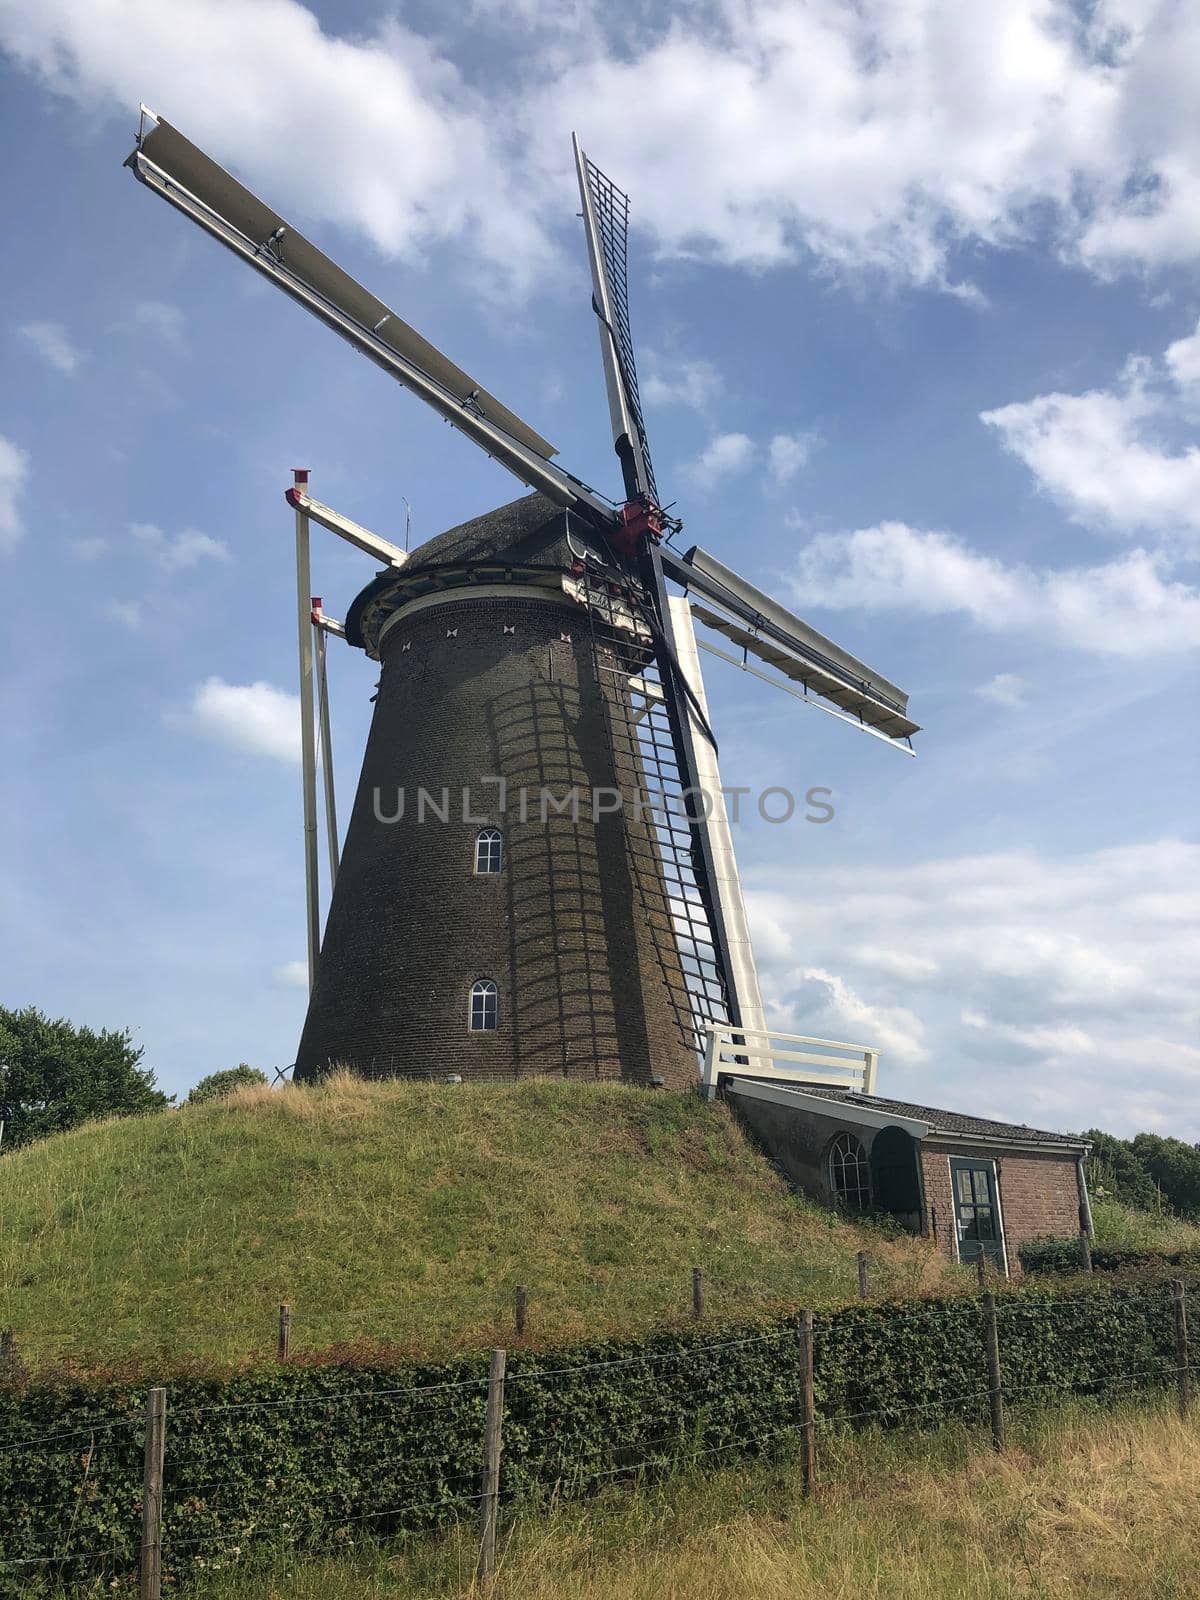 Bronkhorster windmill in The Netherlands